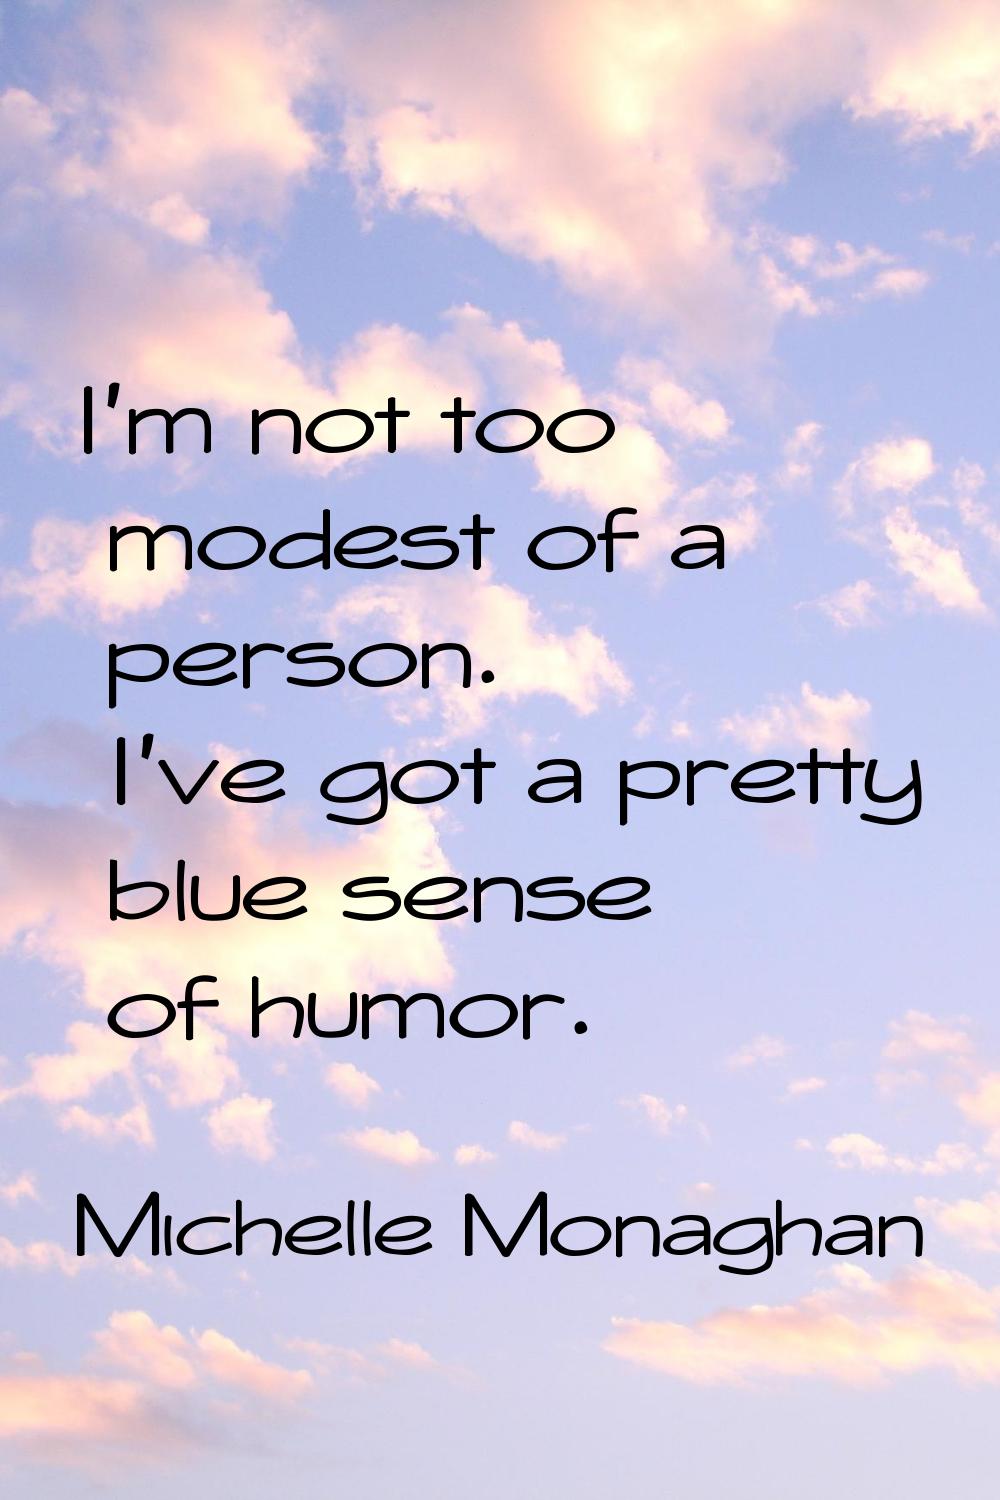 I'm not too modest of a person. I've got a pretty blue sense of humor.